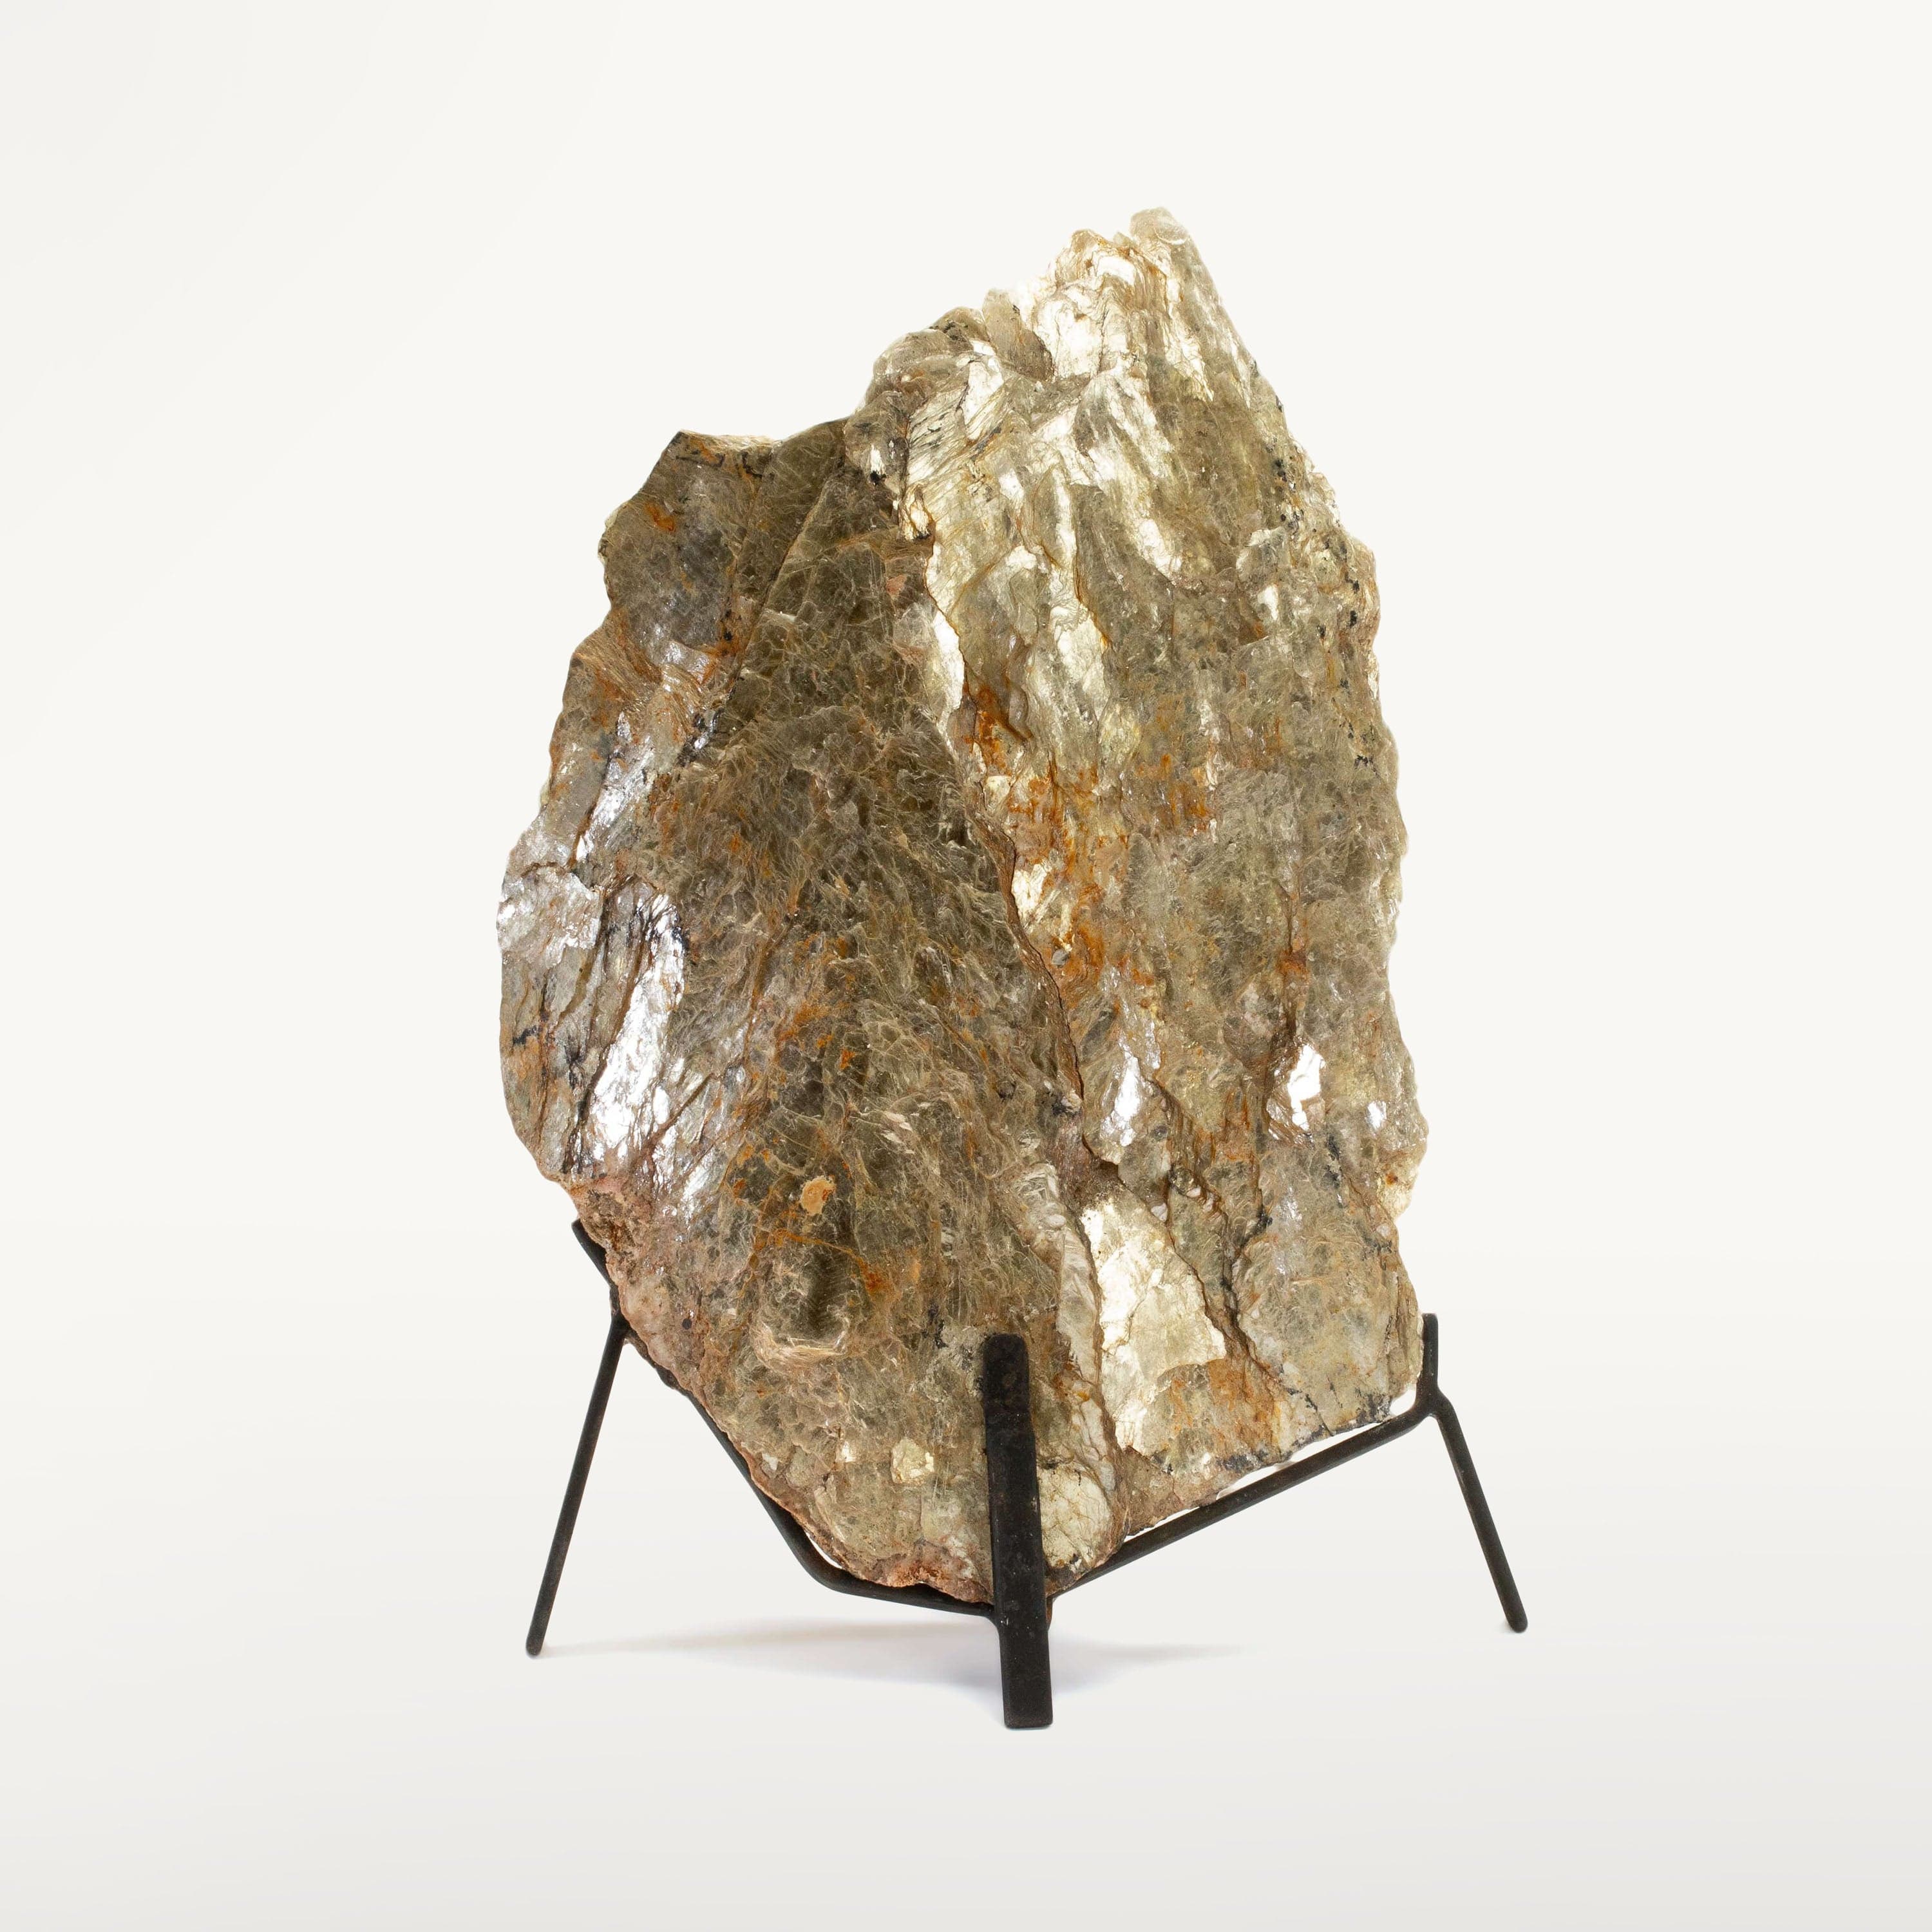 Kalifano Mica Natural Mica on Custom Stand from Brazil - 16" / 17 lbs MC3900.001